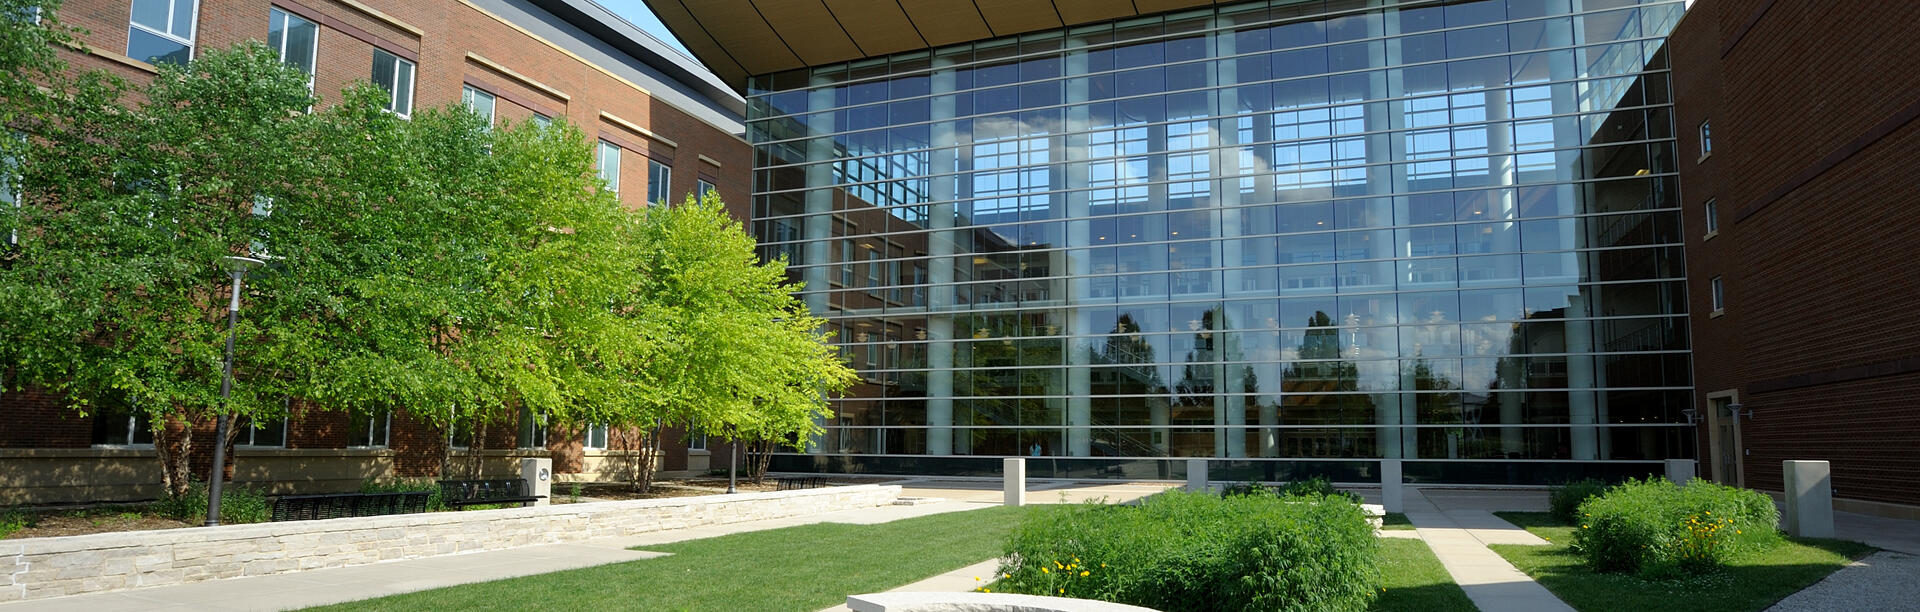 Gies College of Business Building